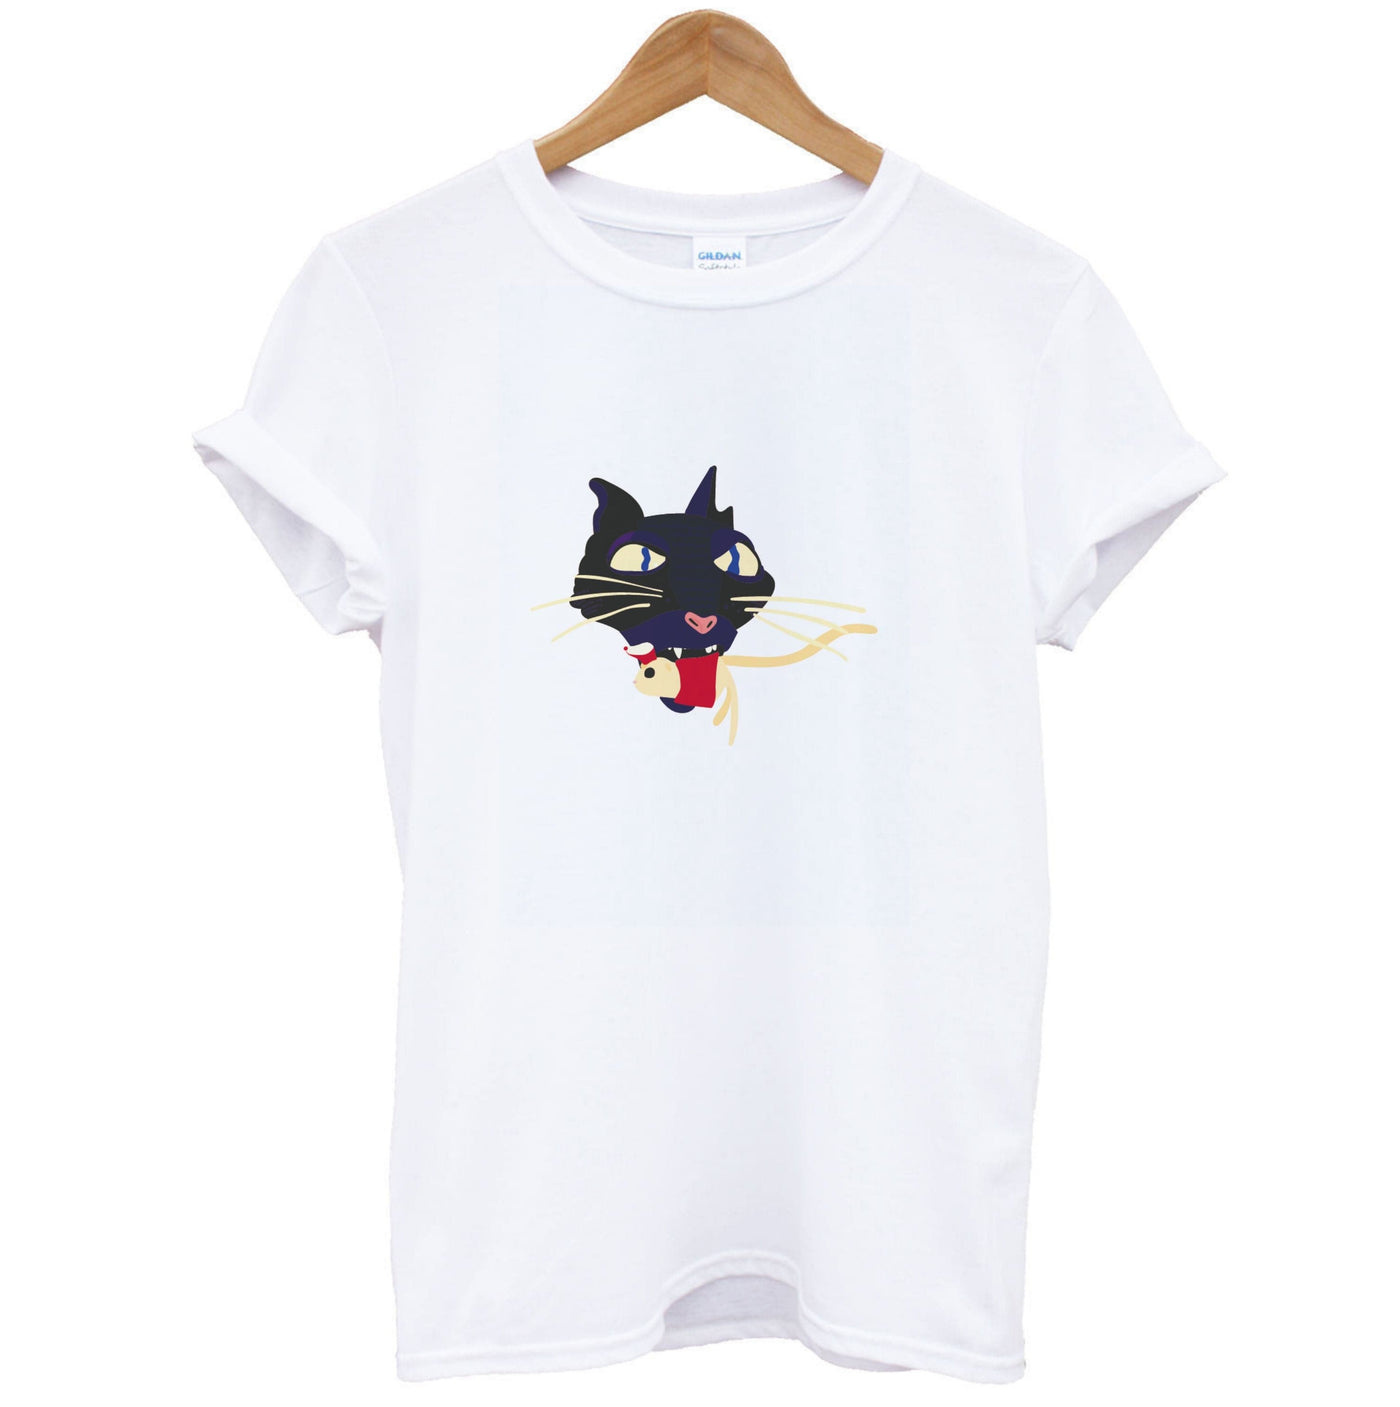 Mouse Eating - Coraline T-Shirt